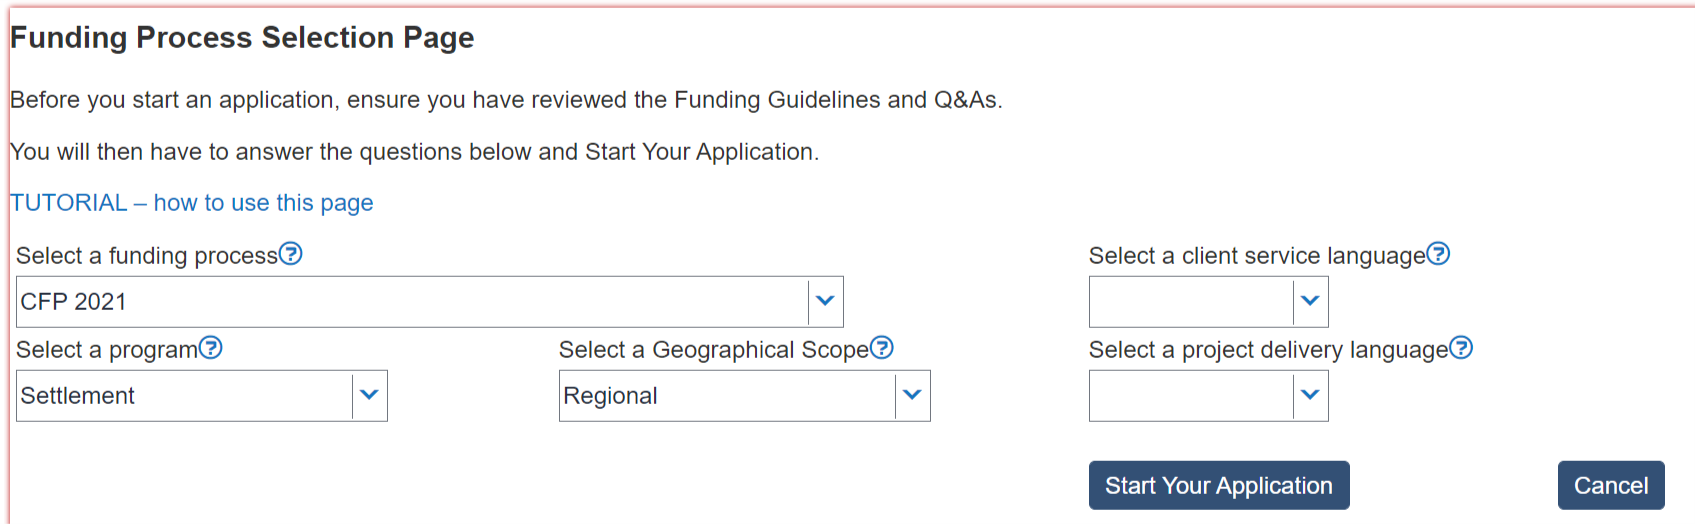 Funding Process Selection Page: